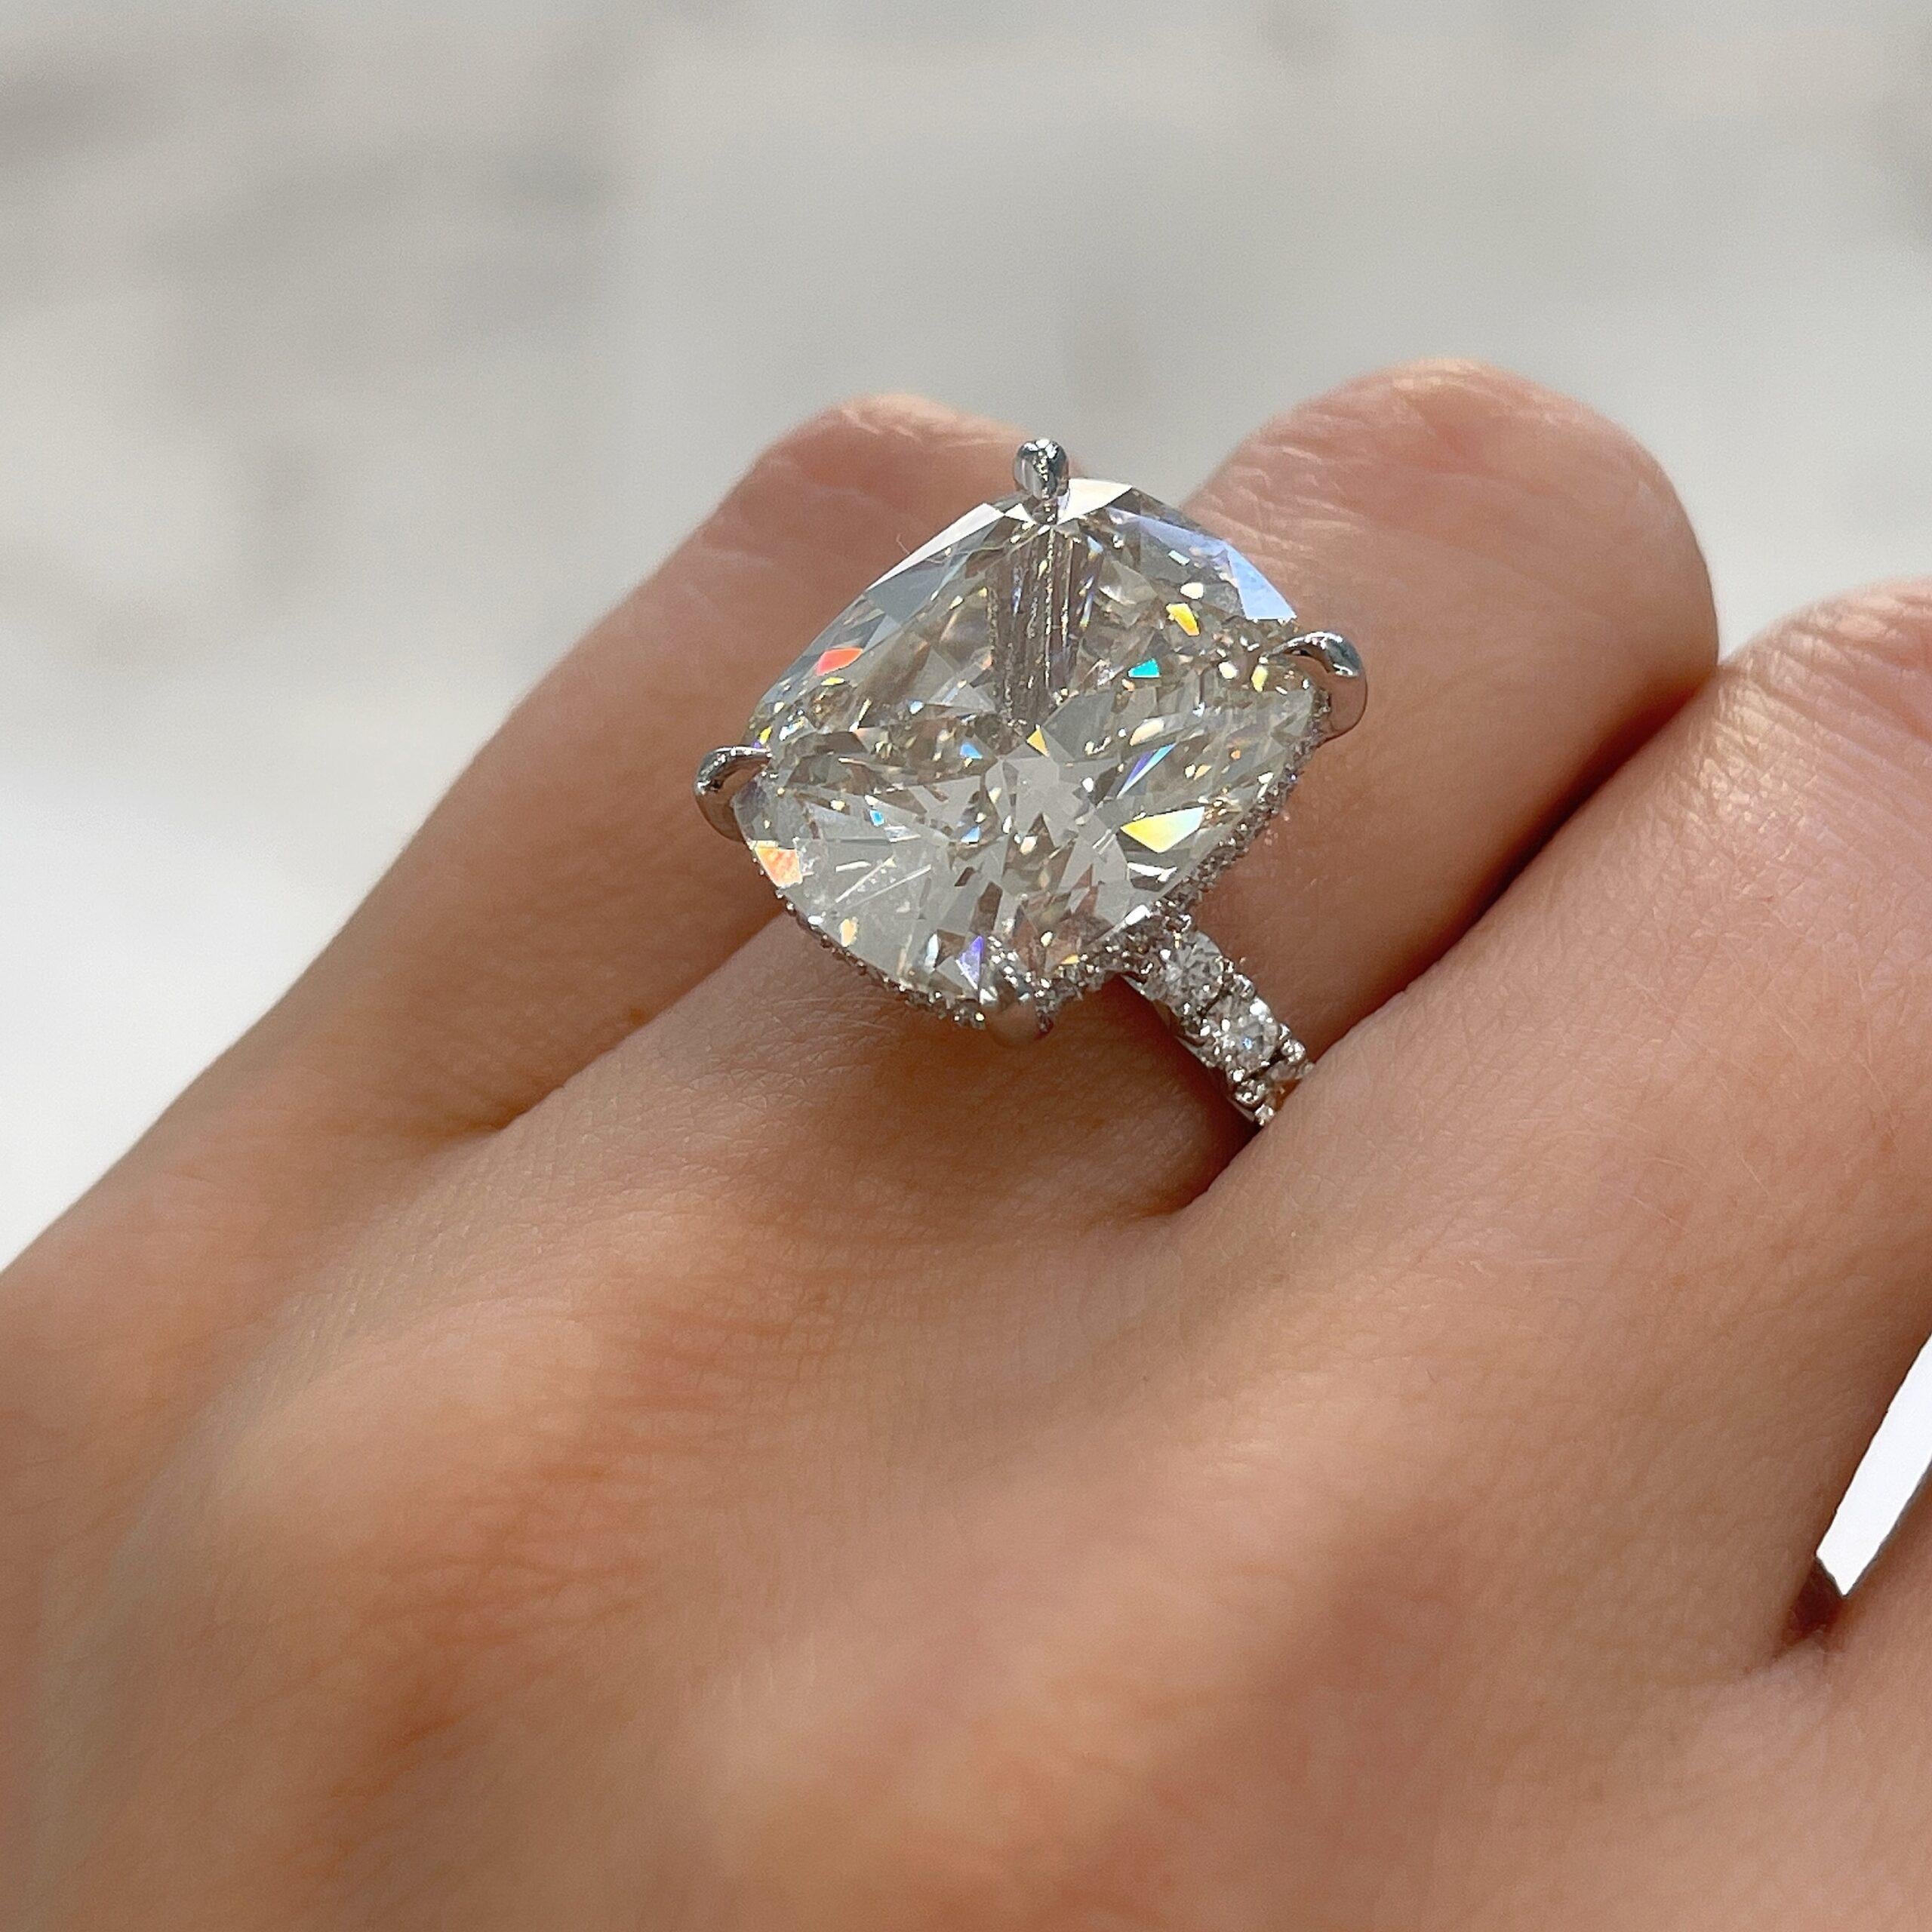 Here is a classic oversized diamond engagement ring by Antinori di Sanpietro ROMA 

 The center diamond is certified by GIA. The center stone is just over 10 cts, H in color, Internally Flawless in clarity.The center pear shaped diamond is very well